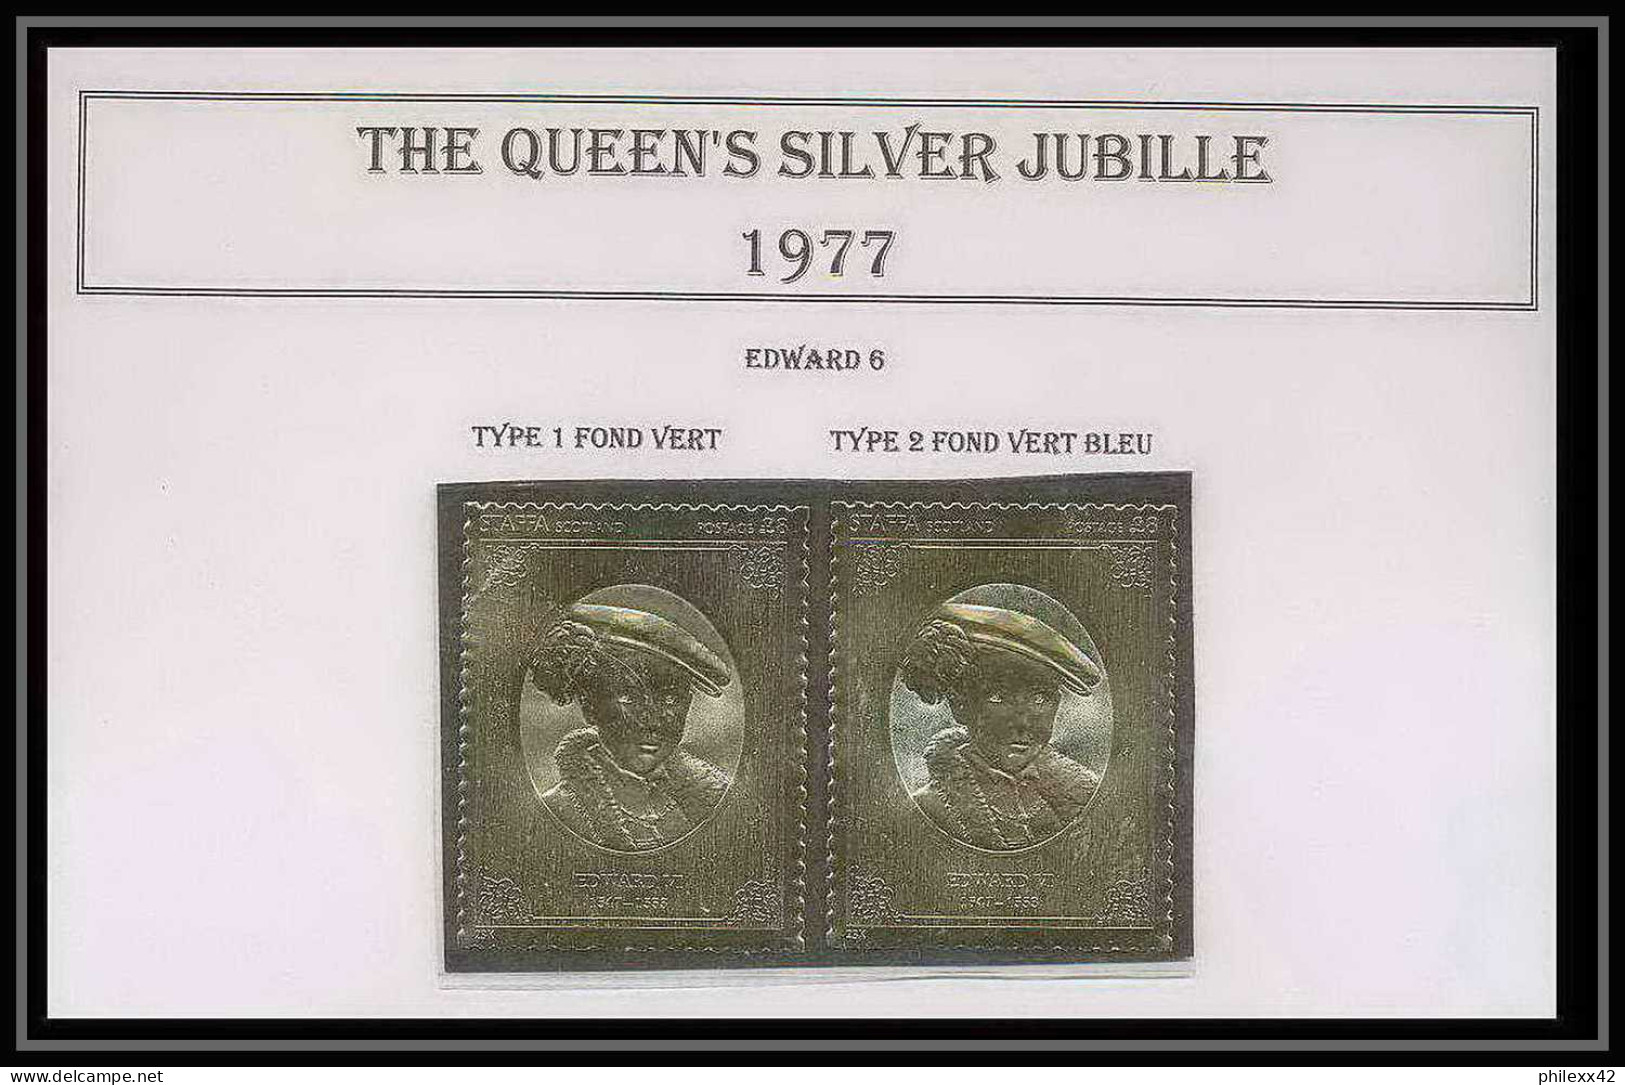 460 Staffa Scotland The Queen's Silver Jubilee 1977 OR Gold Stamps Monarchy United Kingdom Edward 6 Type 1&2 Neuf** Mnh - Escocia